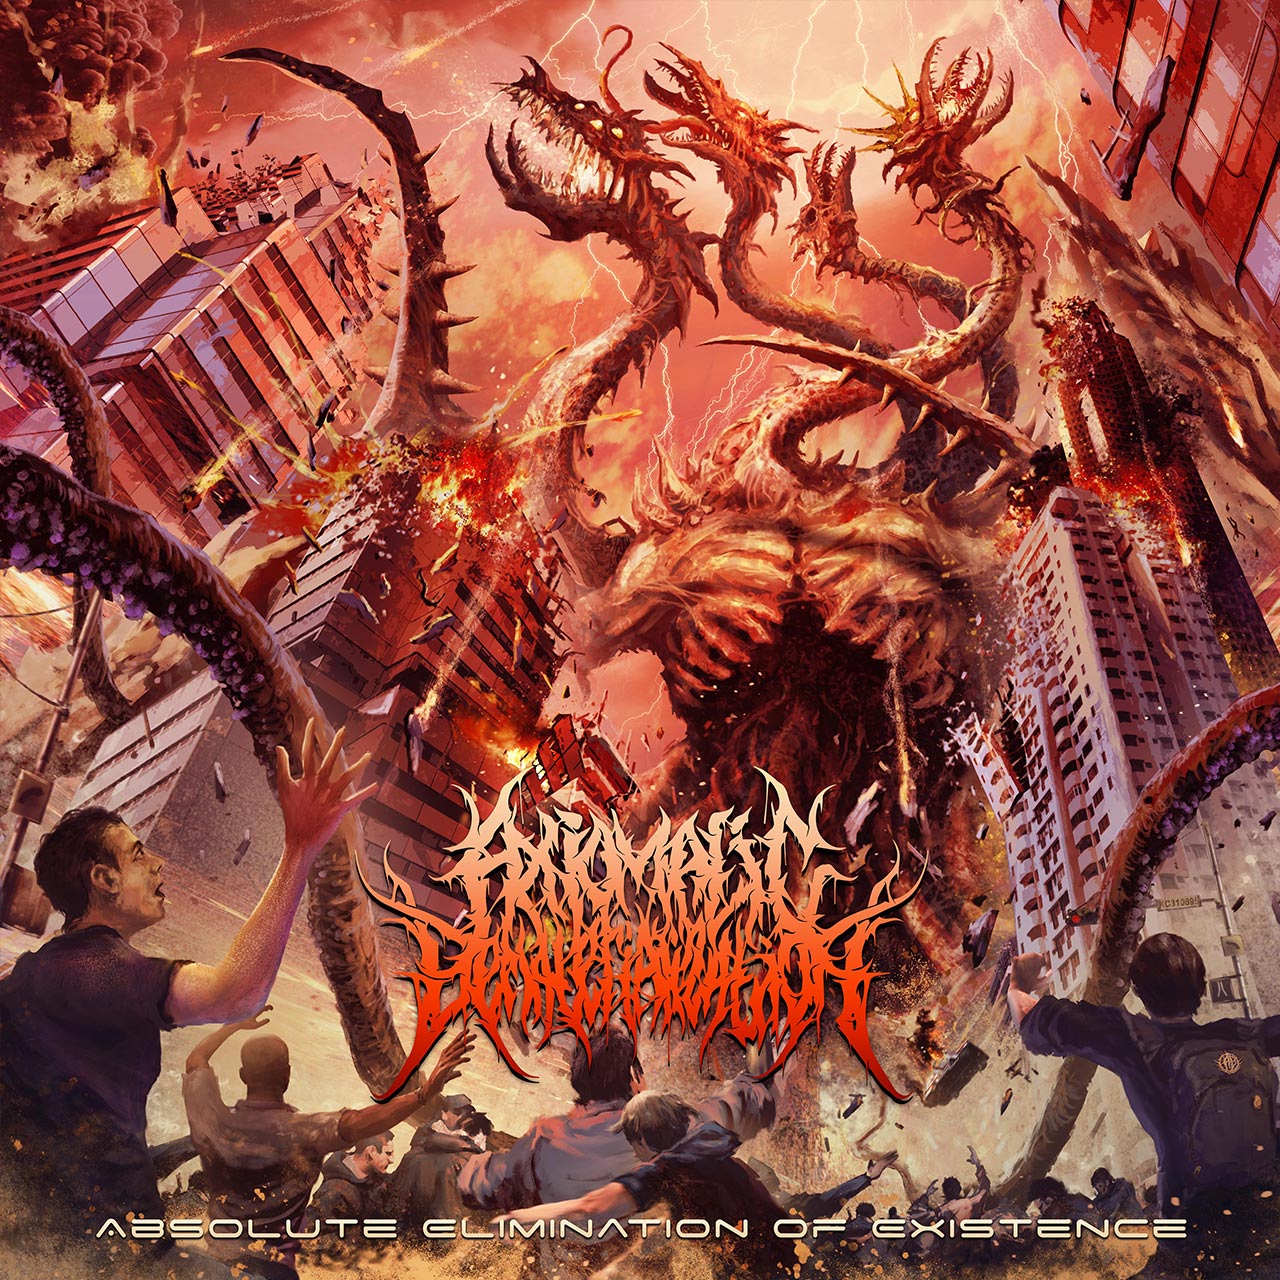 Cover art for second single. Alien mosters attack Moscow City. One in the centre is the leader and the others are his soldiers